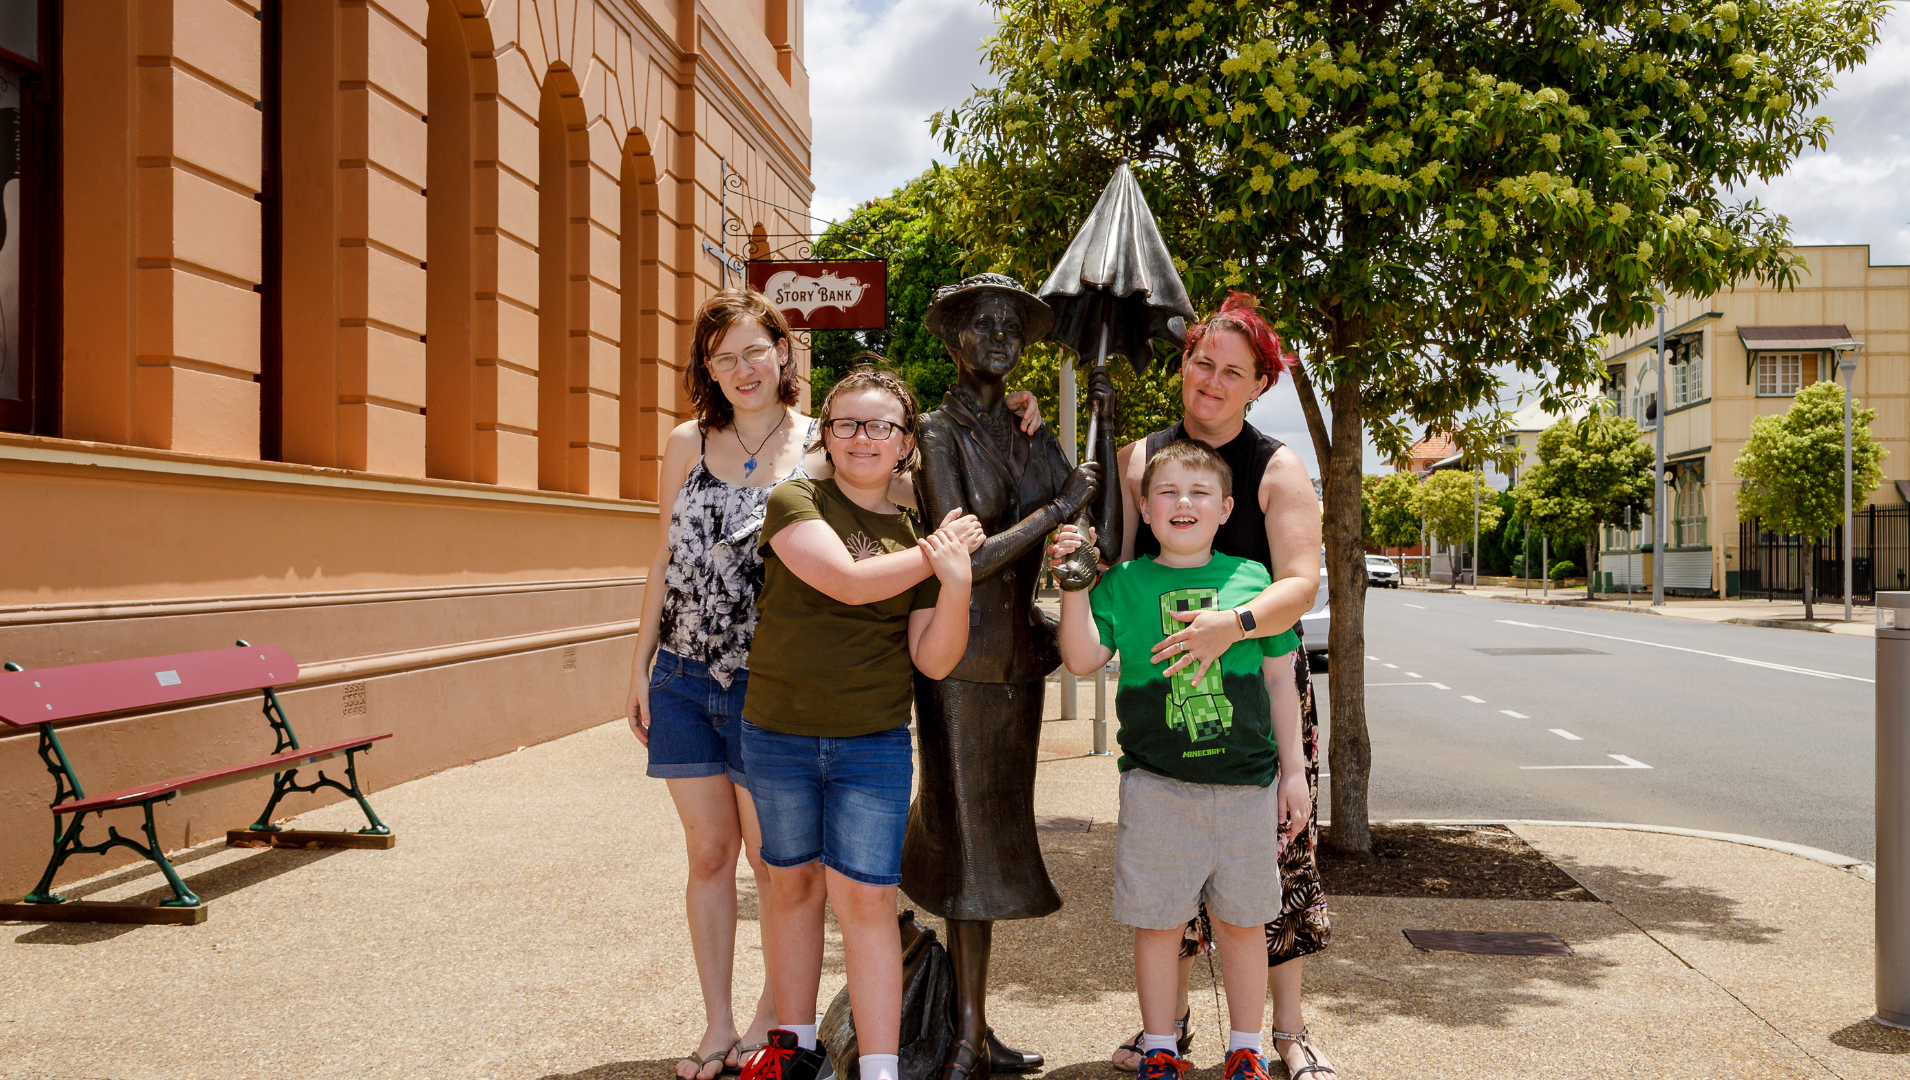 A photo of all 4 members of the family, posed around a statue of Mary Poppins